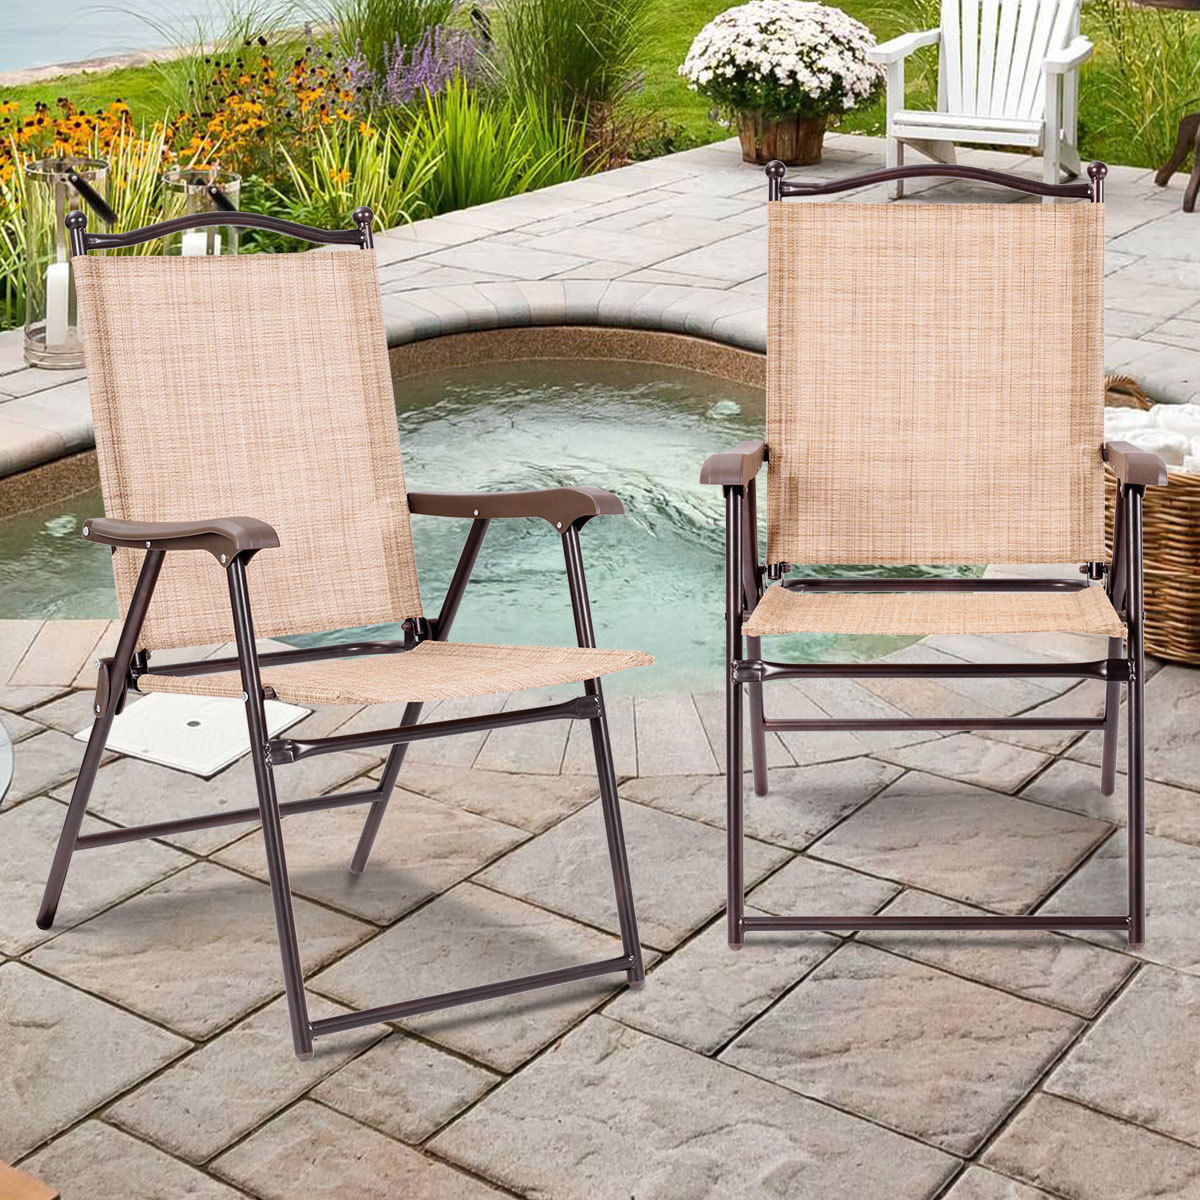 Set Of 2 Folding Patio Furniture Sling Back Chairs Outdoors